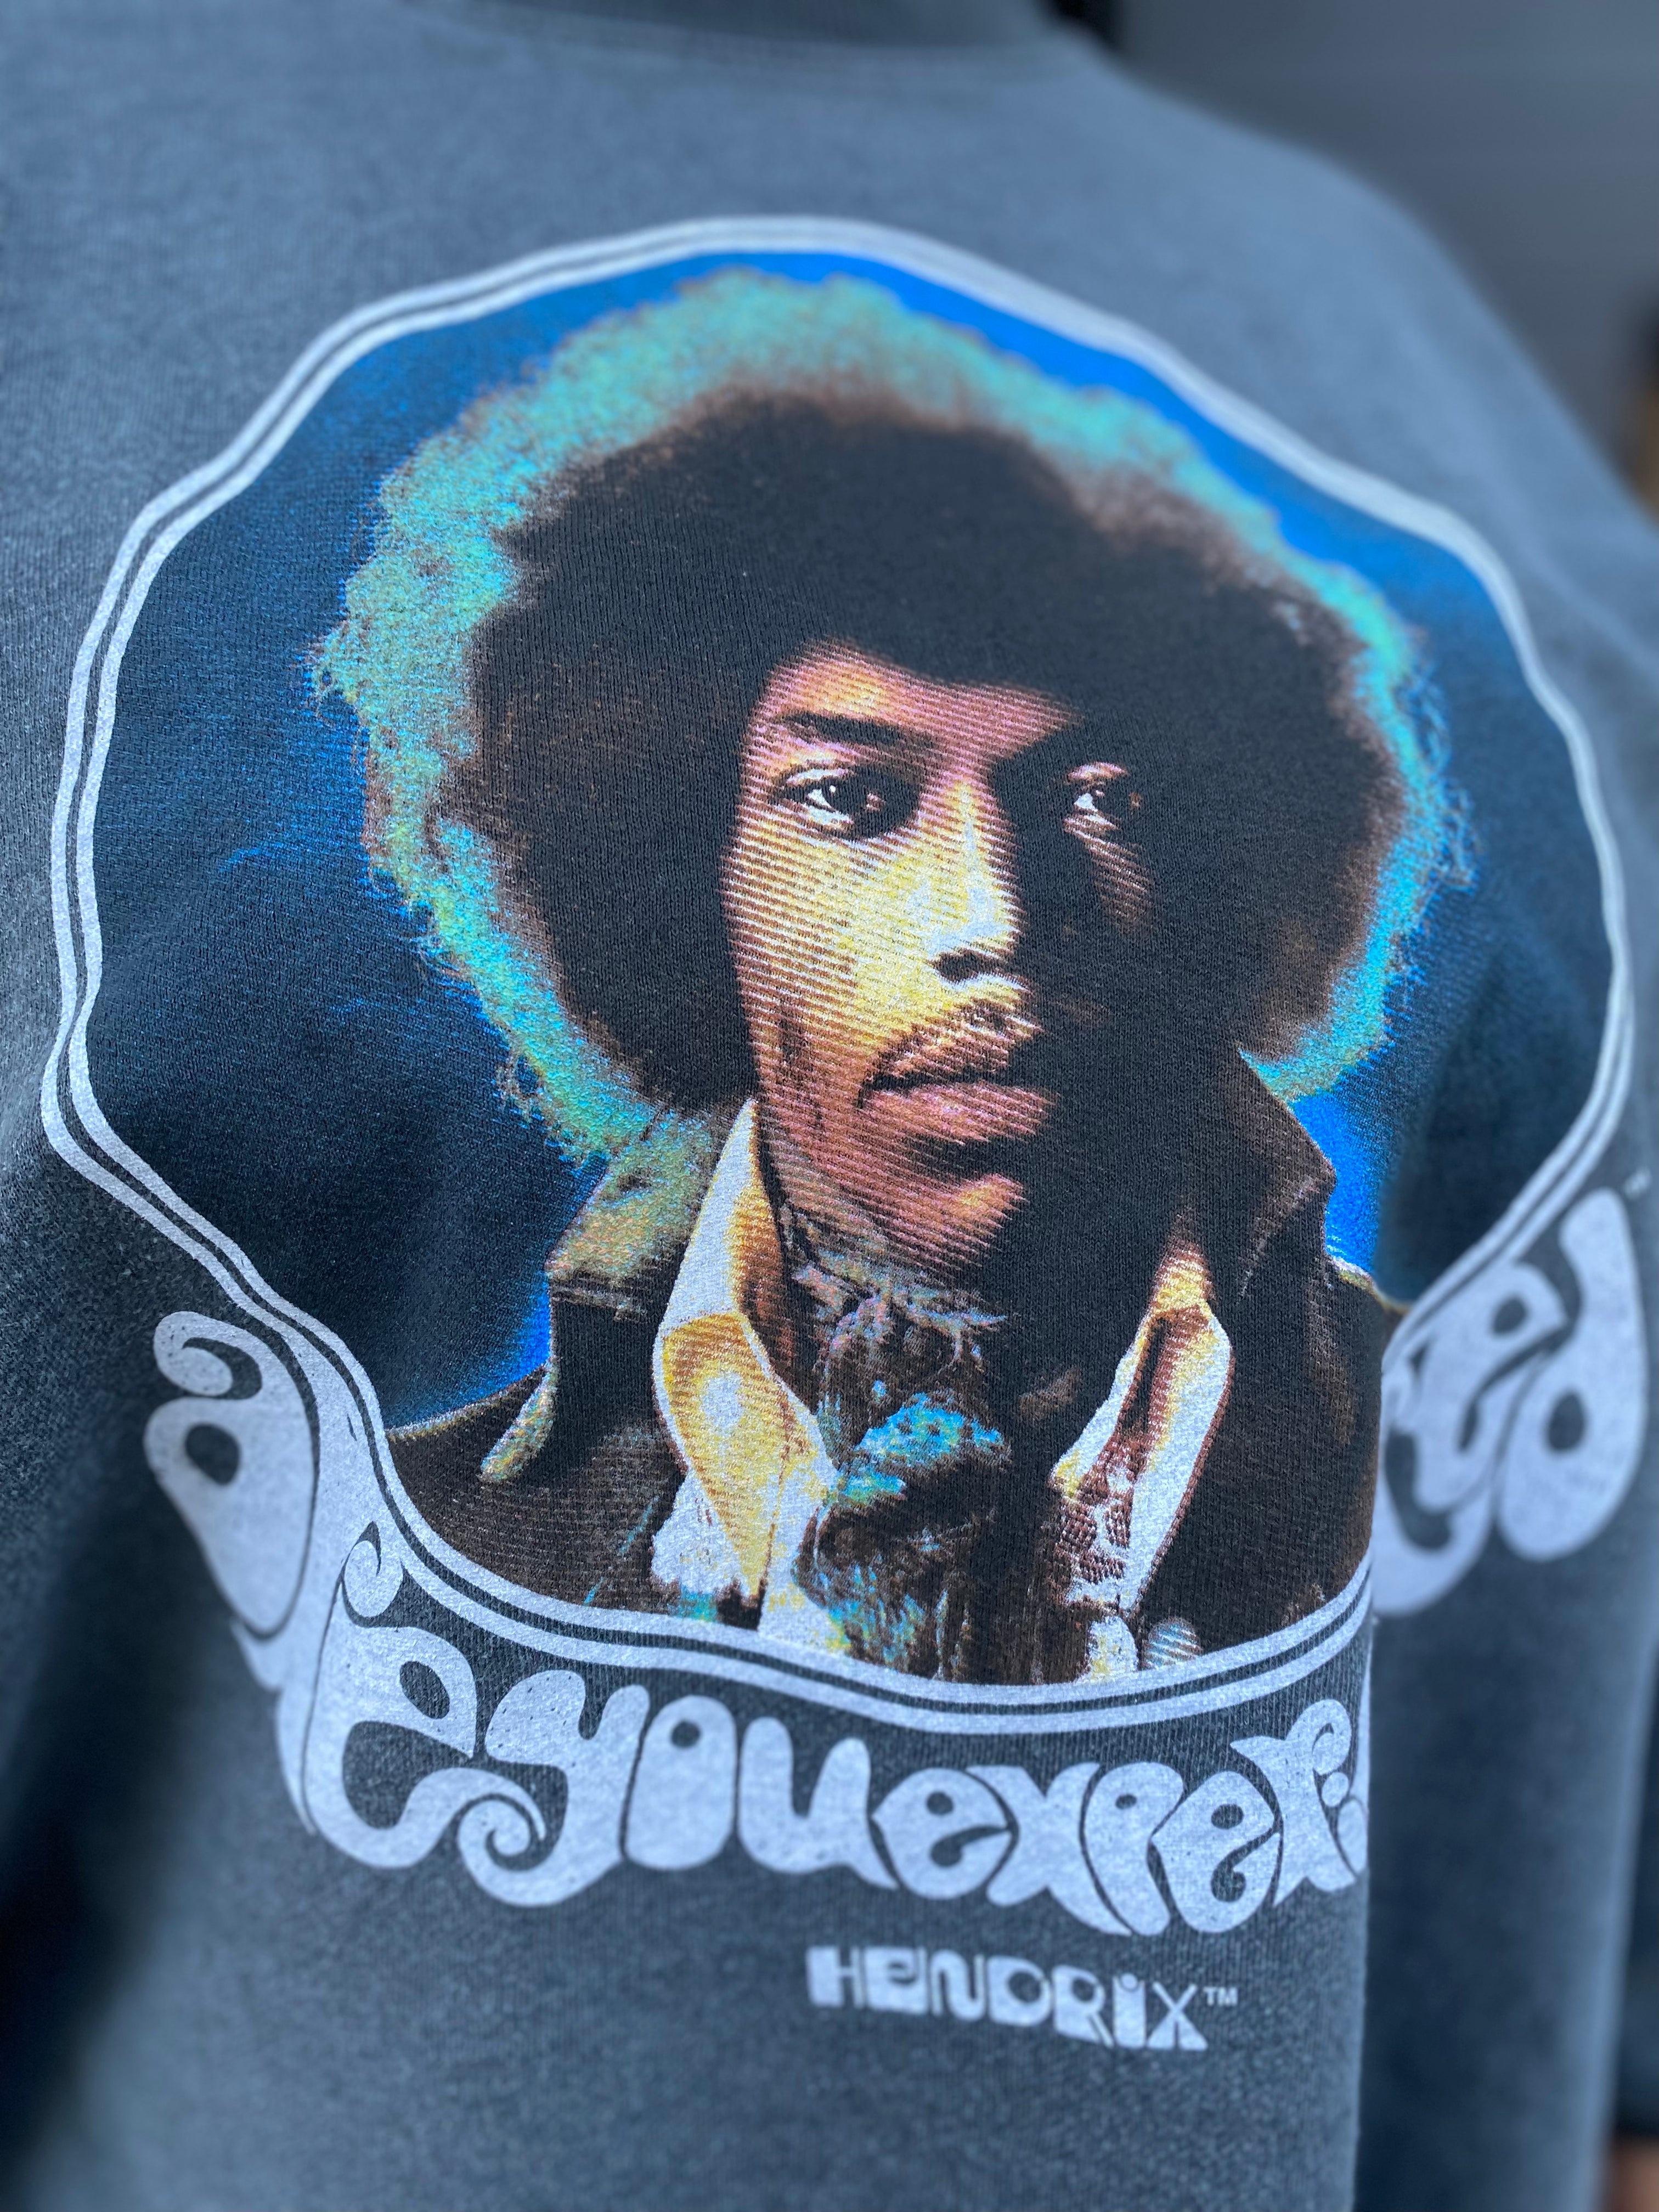 Are You Experienced Sweatshirt